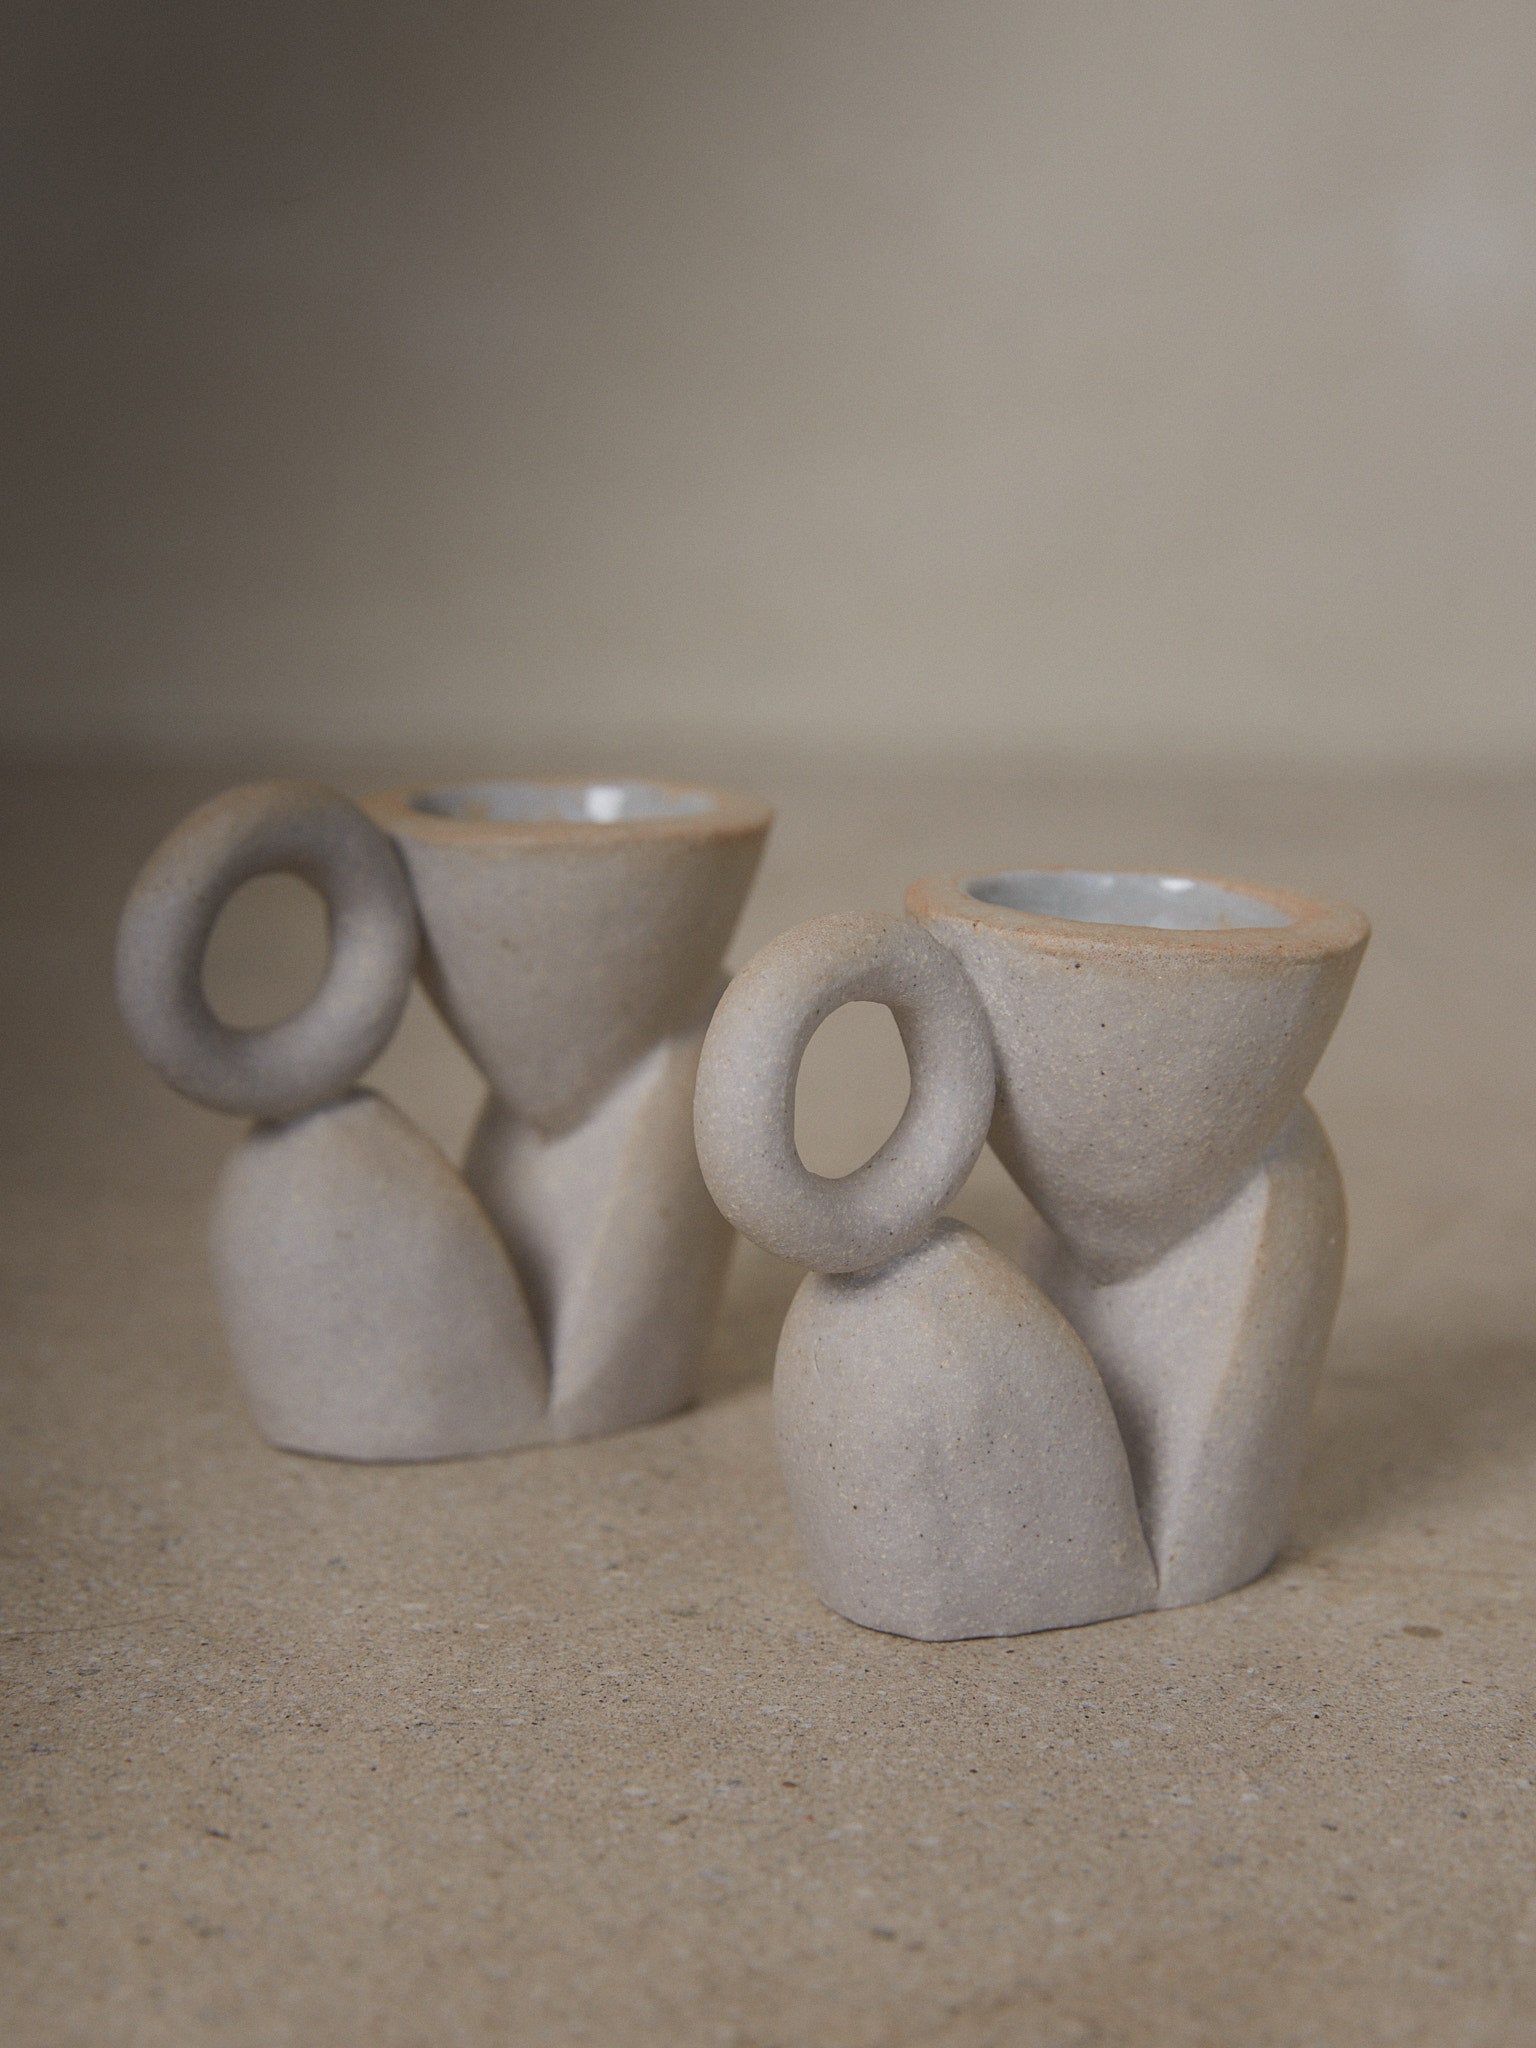 Bloom Candle Holder Pair. Sculptural abstract candleholders inspired by nature in natural grey ceramic stoneware. 